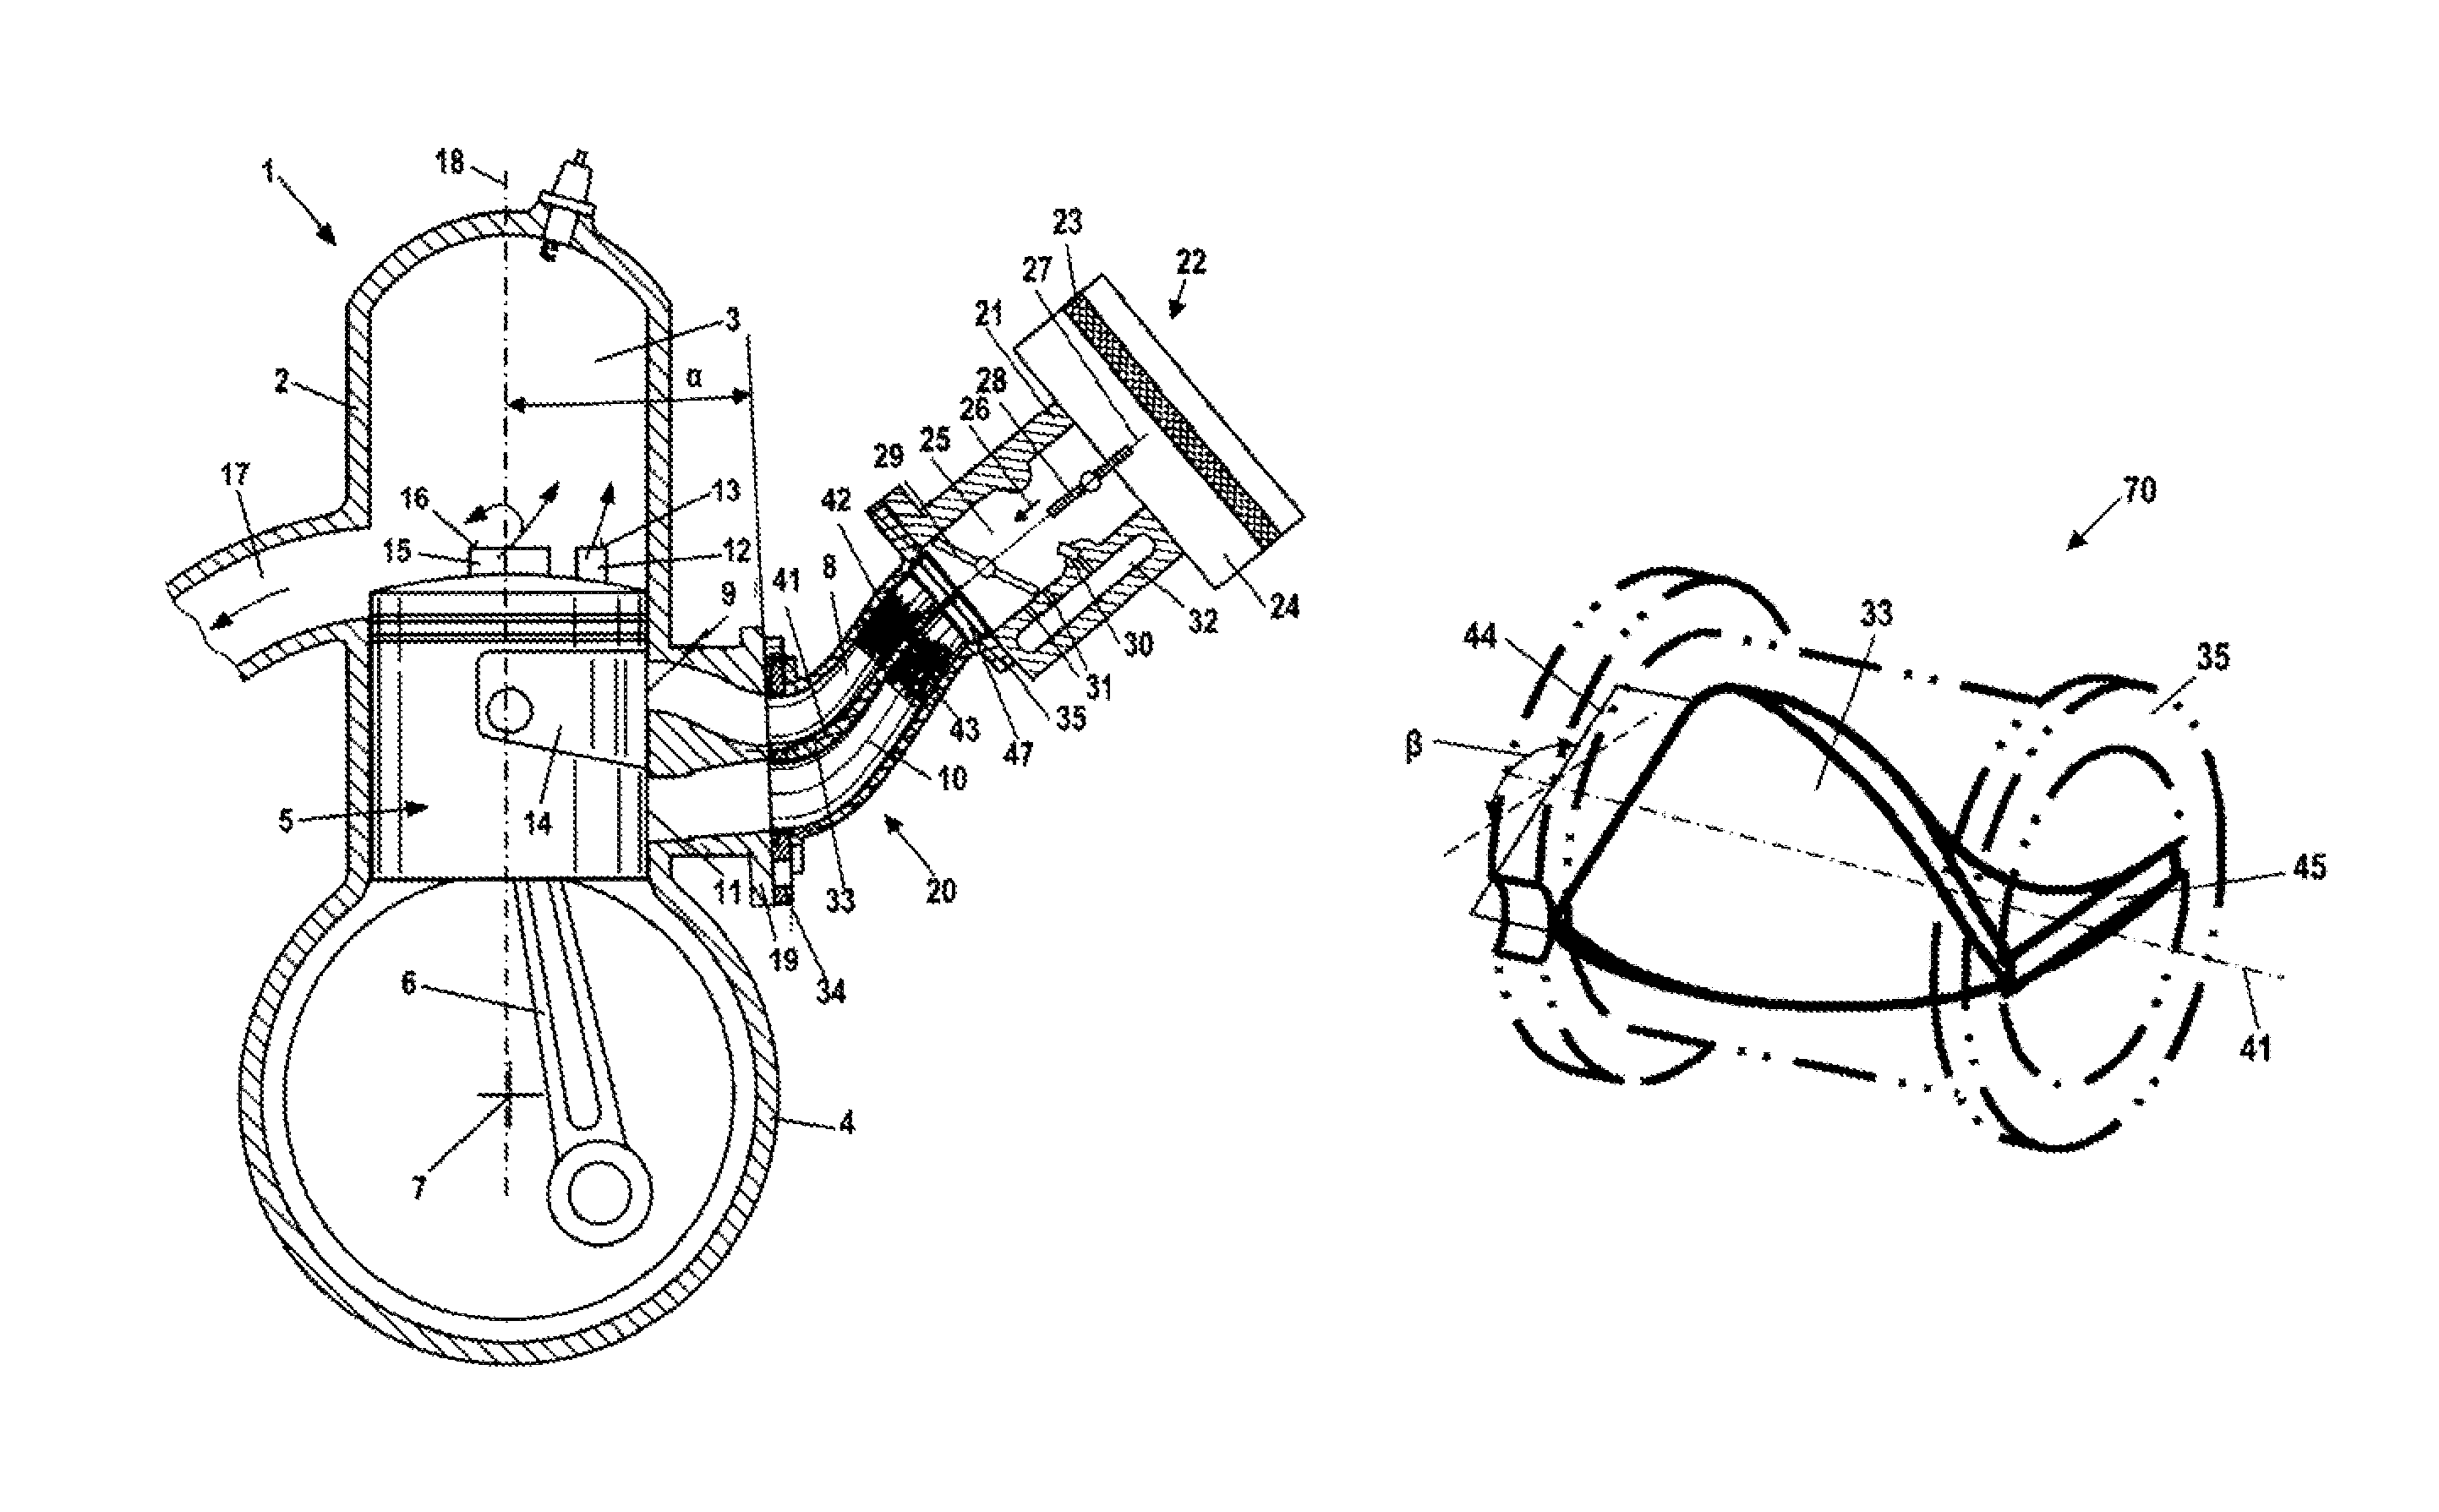 Internal combustion engine having an elastic connector and method of producing same